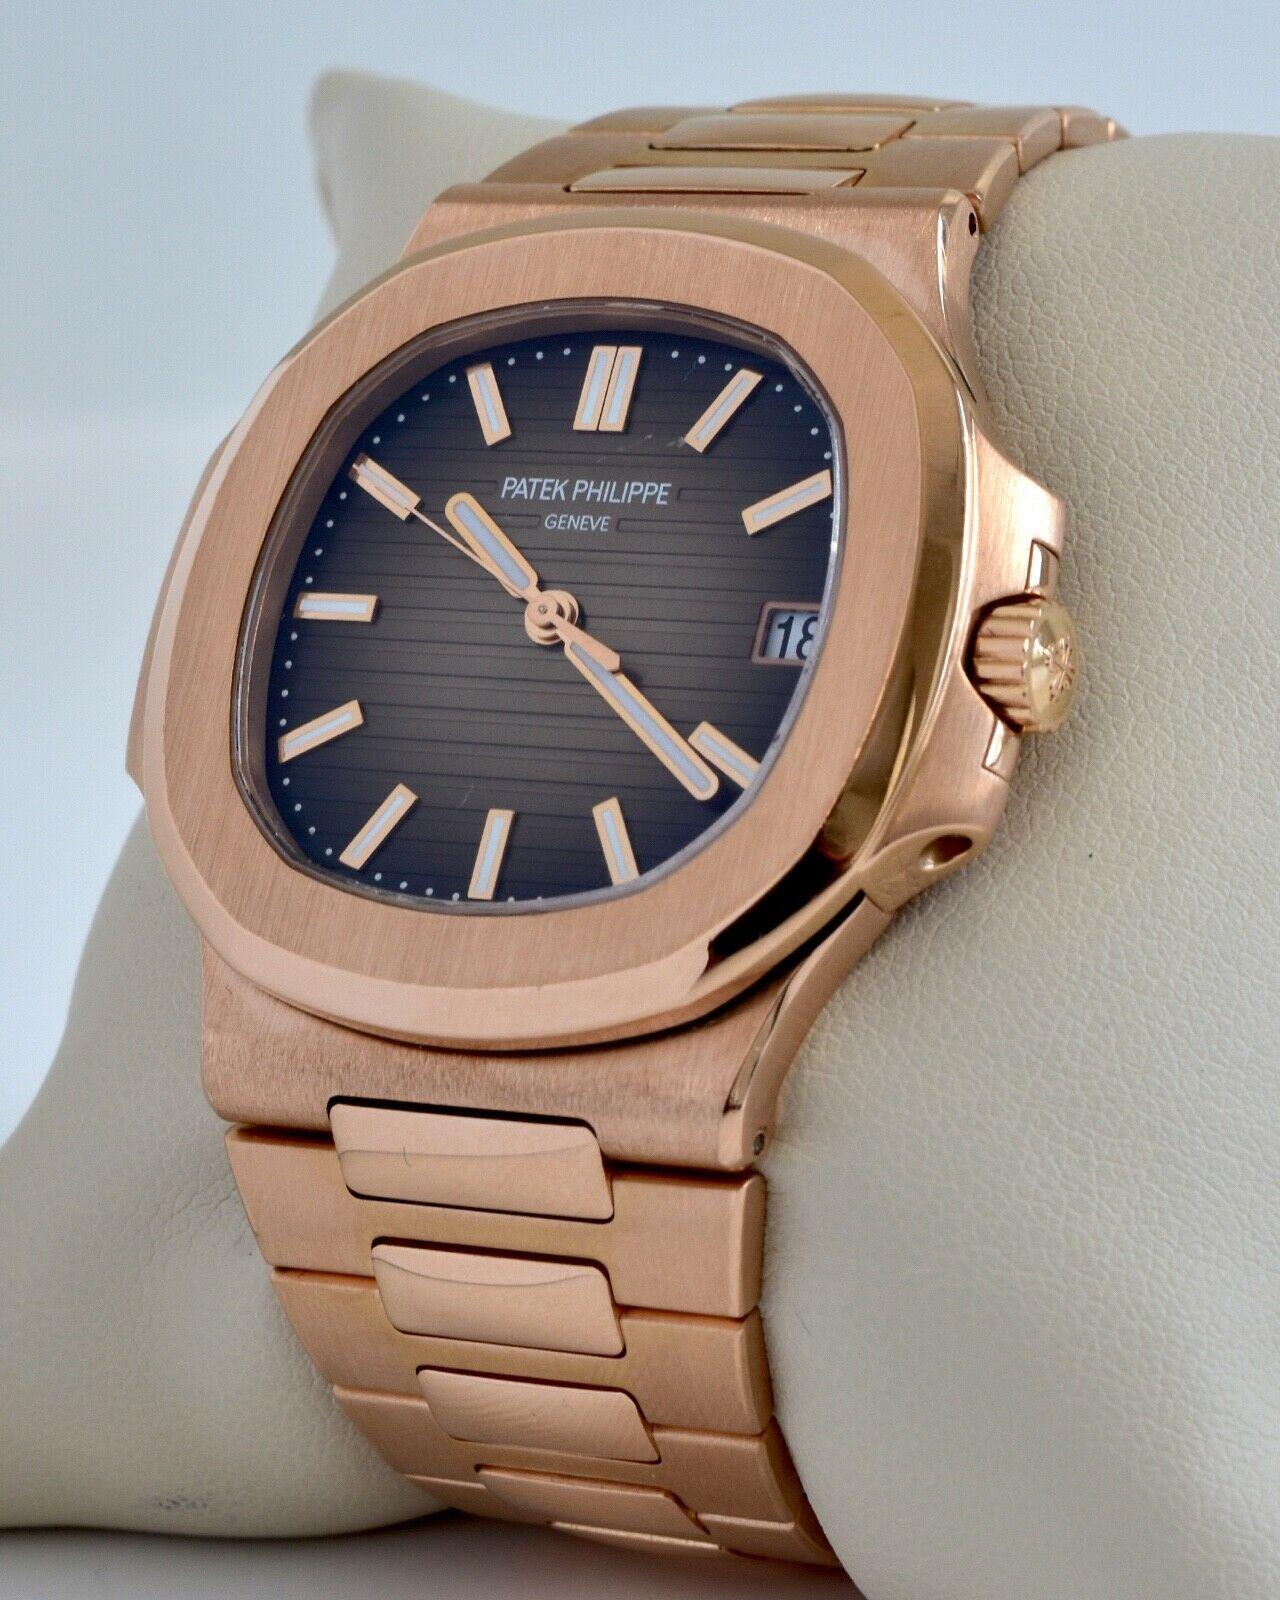 Hands down the most sought after and in-demand watch in the world. The Patek Philippe Nautilus 5711 cased in rose gold is short of a masterpiece. Designed to perfection fits slim on the wrist but commands an incredible presence. The bracelet is